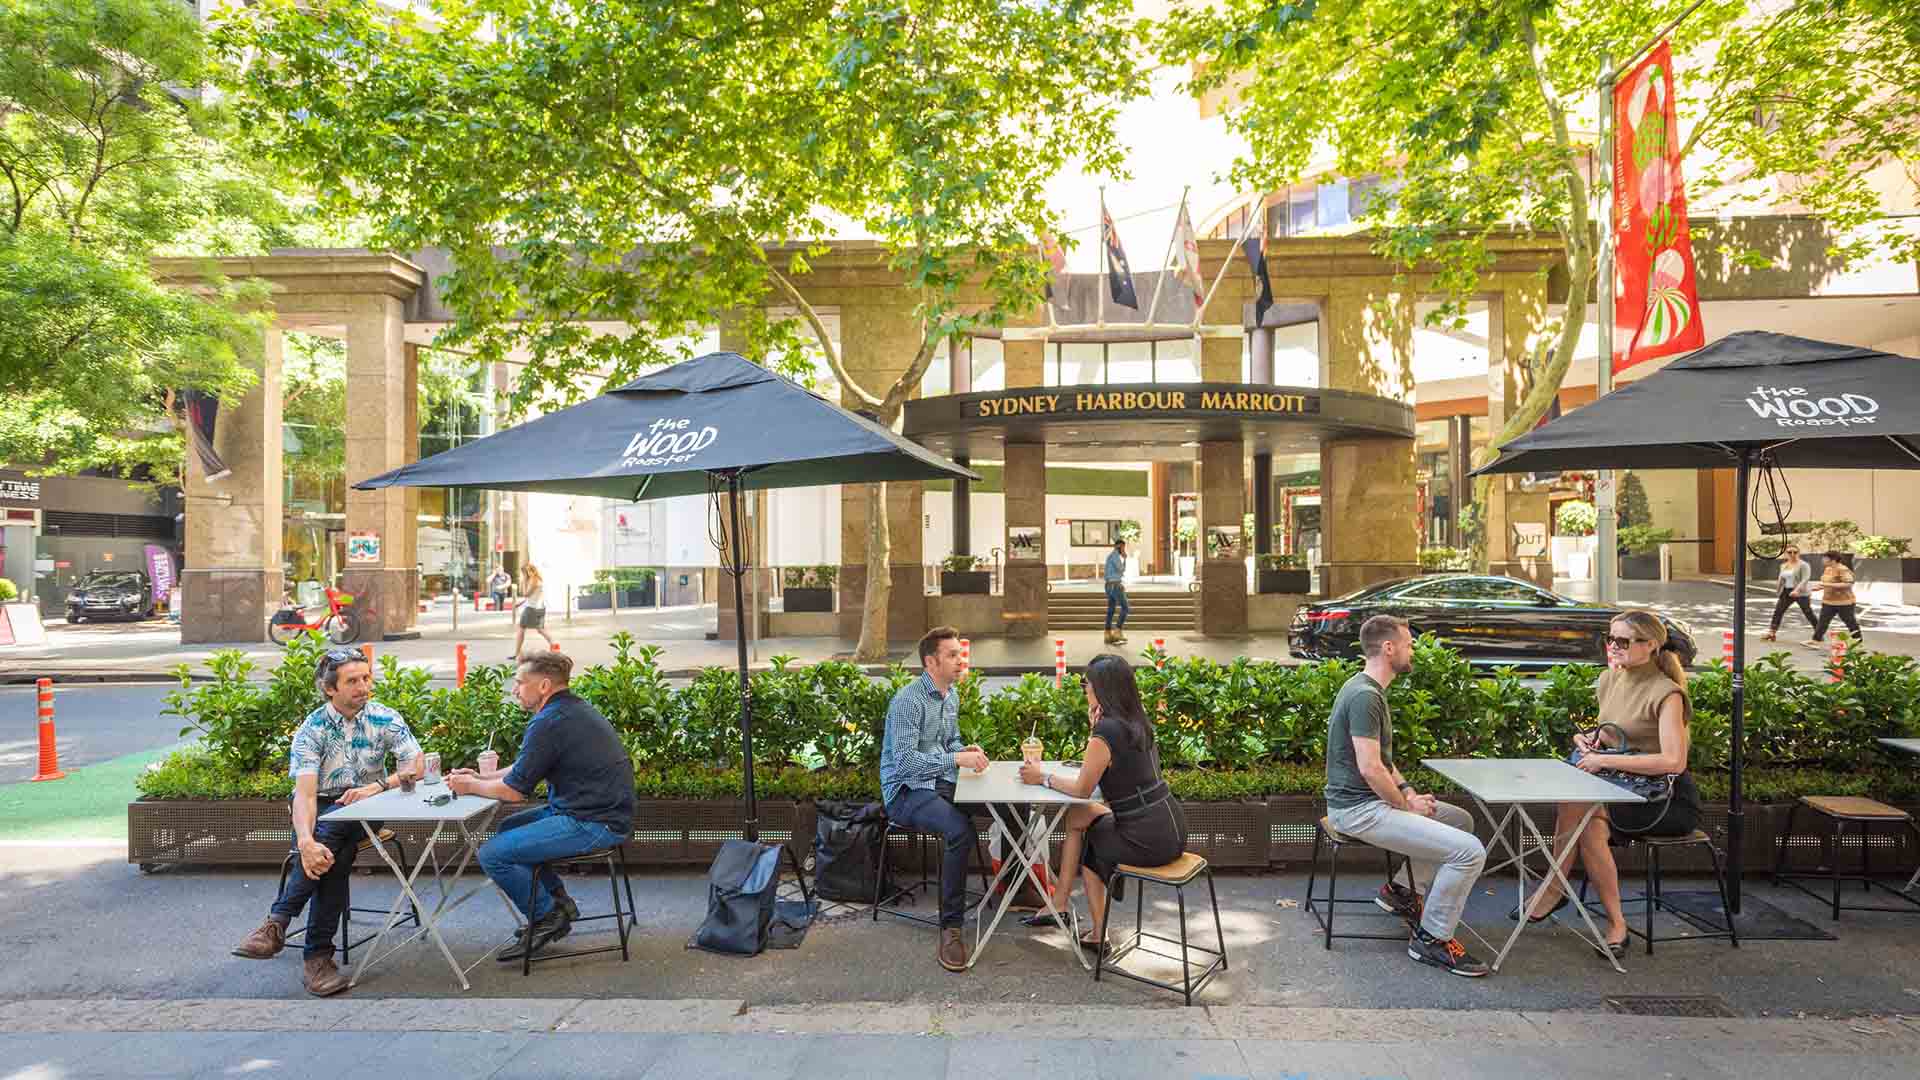 The City of Sydney Has Extended Its Free Outdoor Dining Program Until June 2025